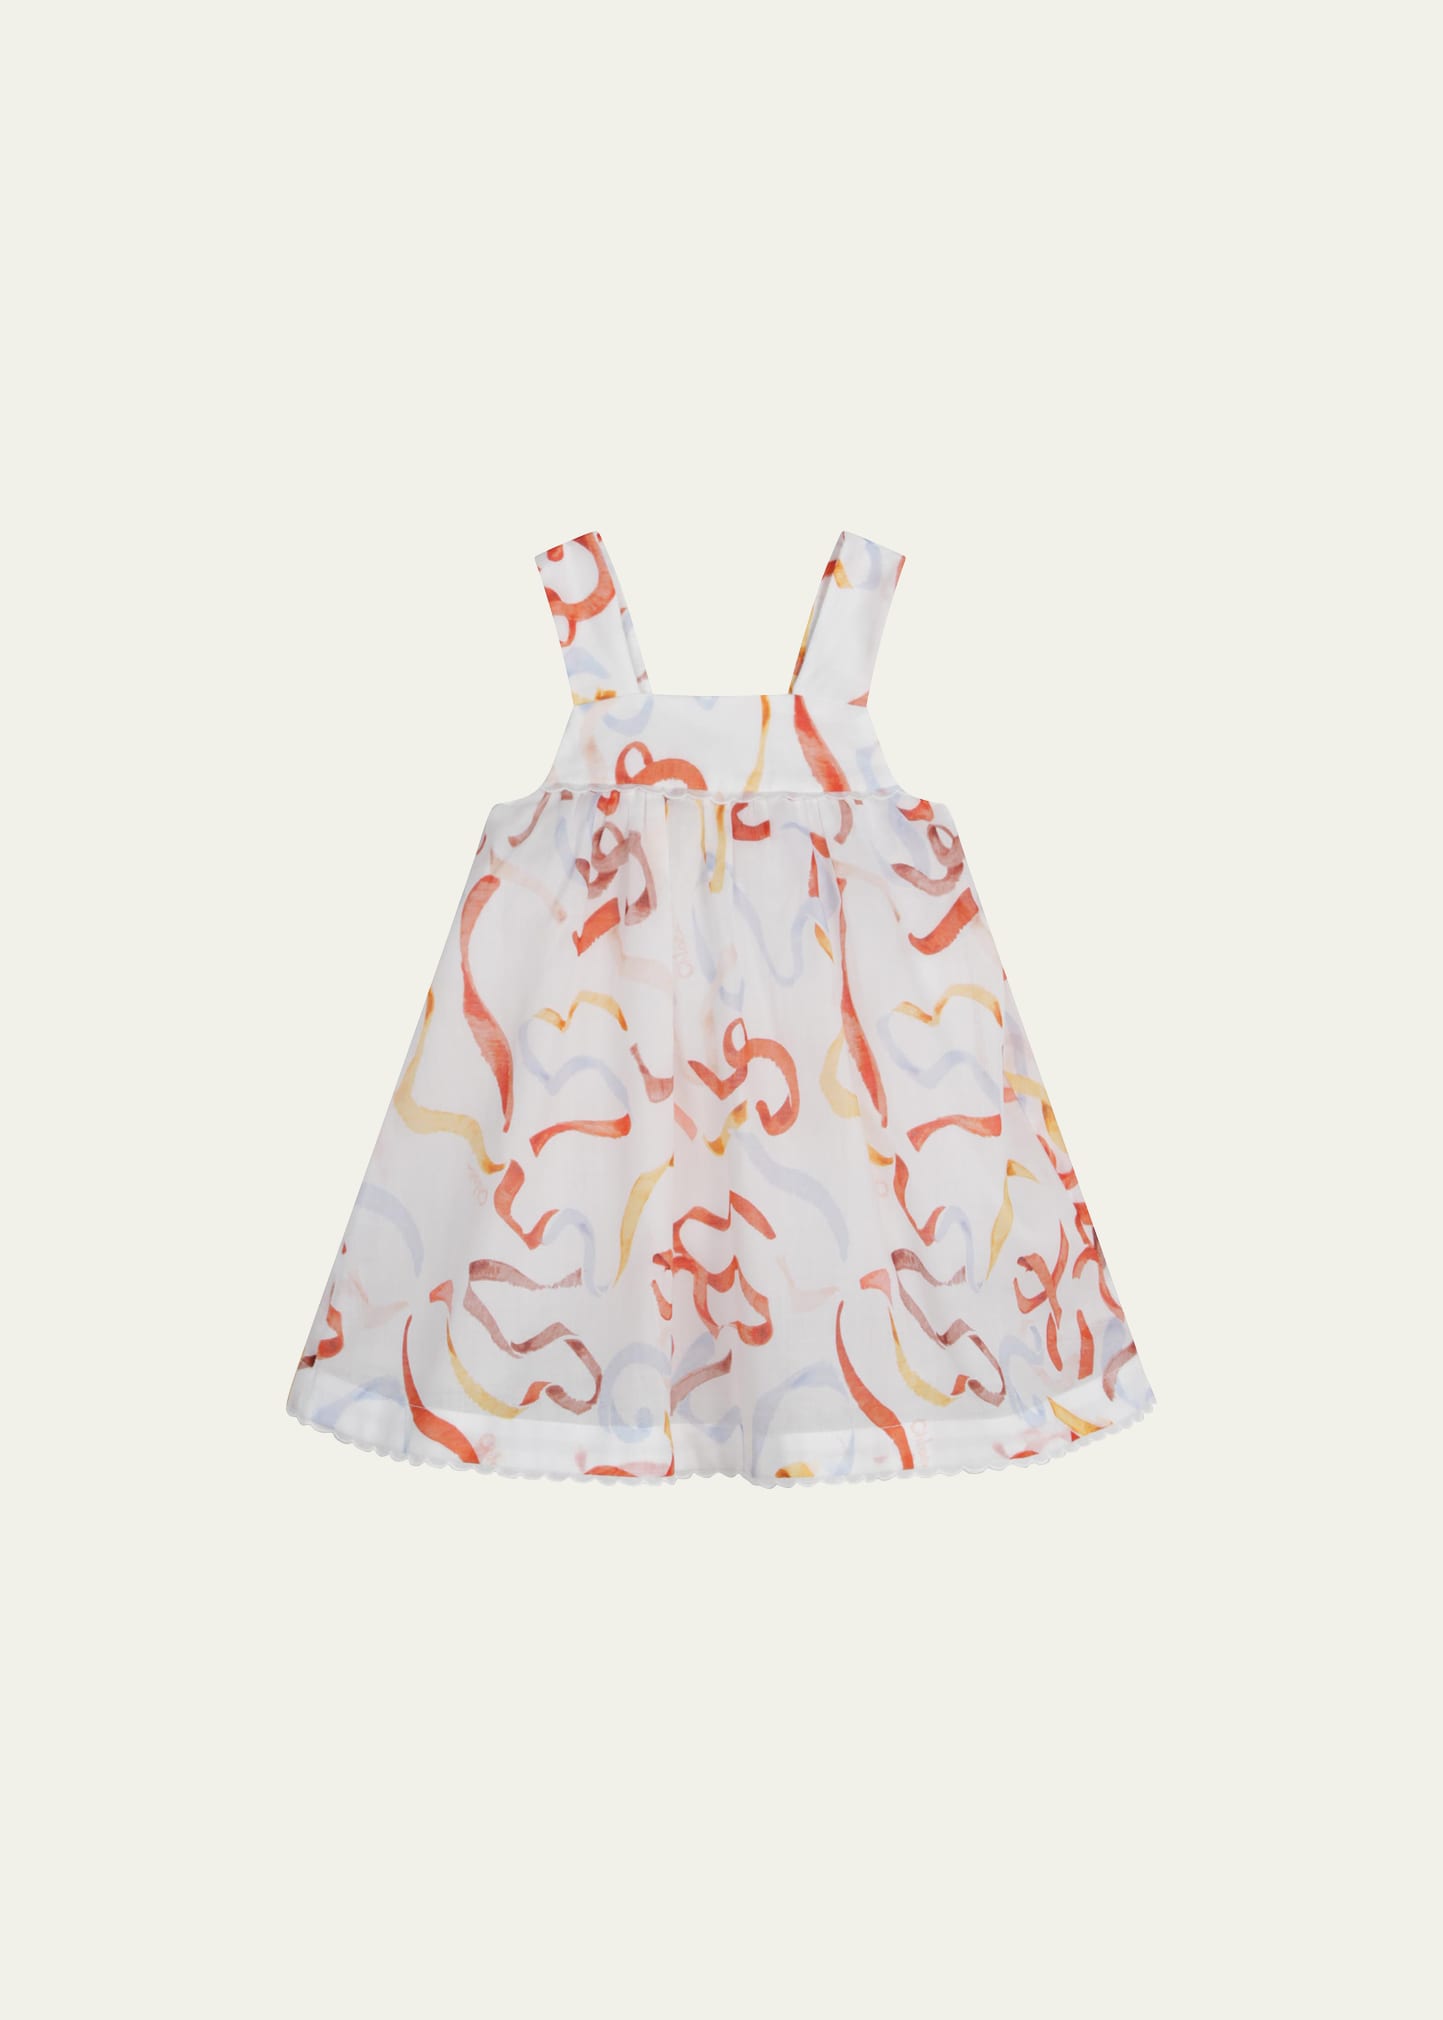 Girl's Dress W/ Multicolor Ribbons-Print, Size 6M-3